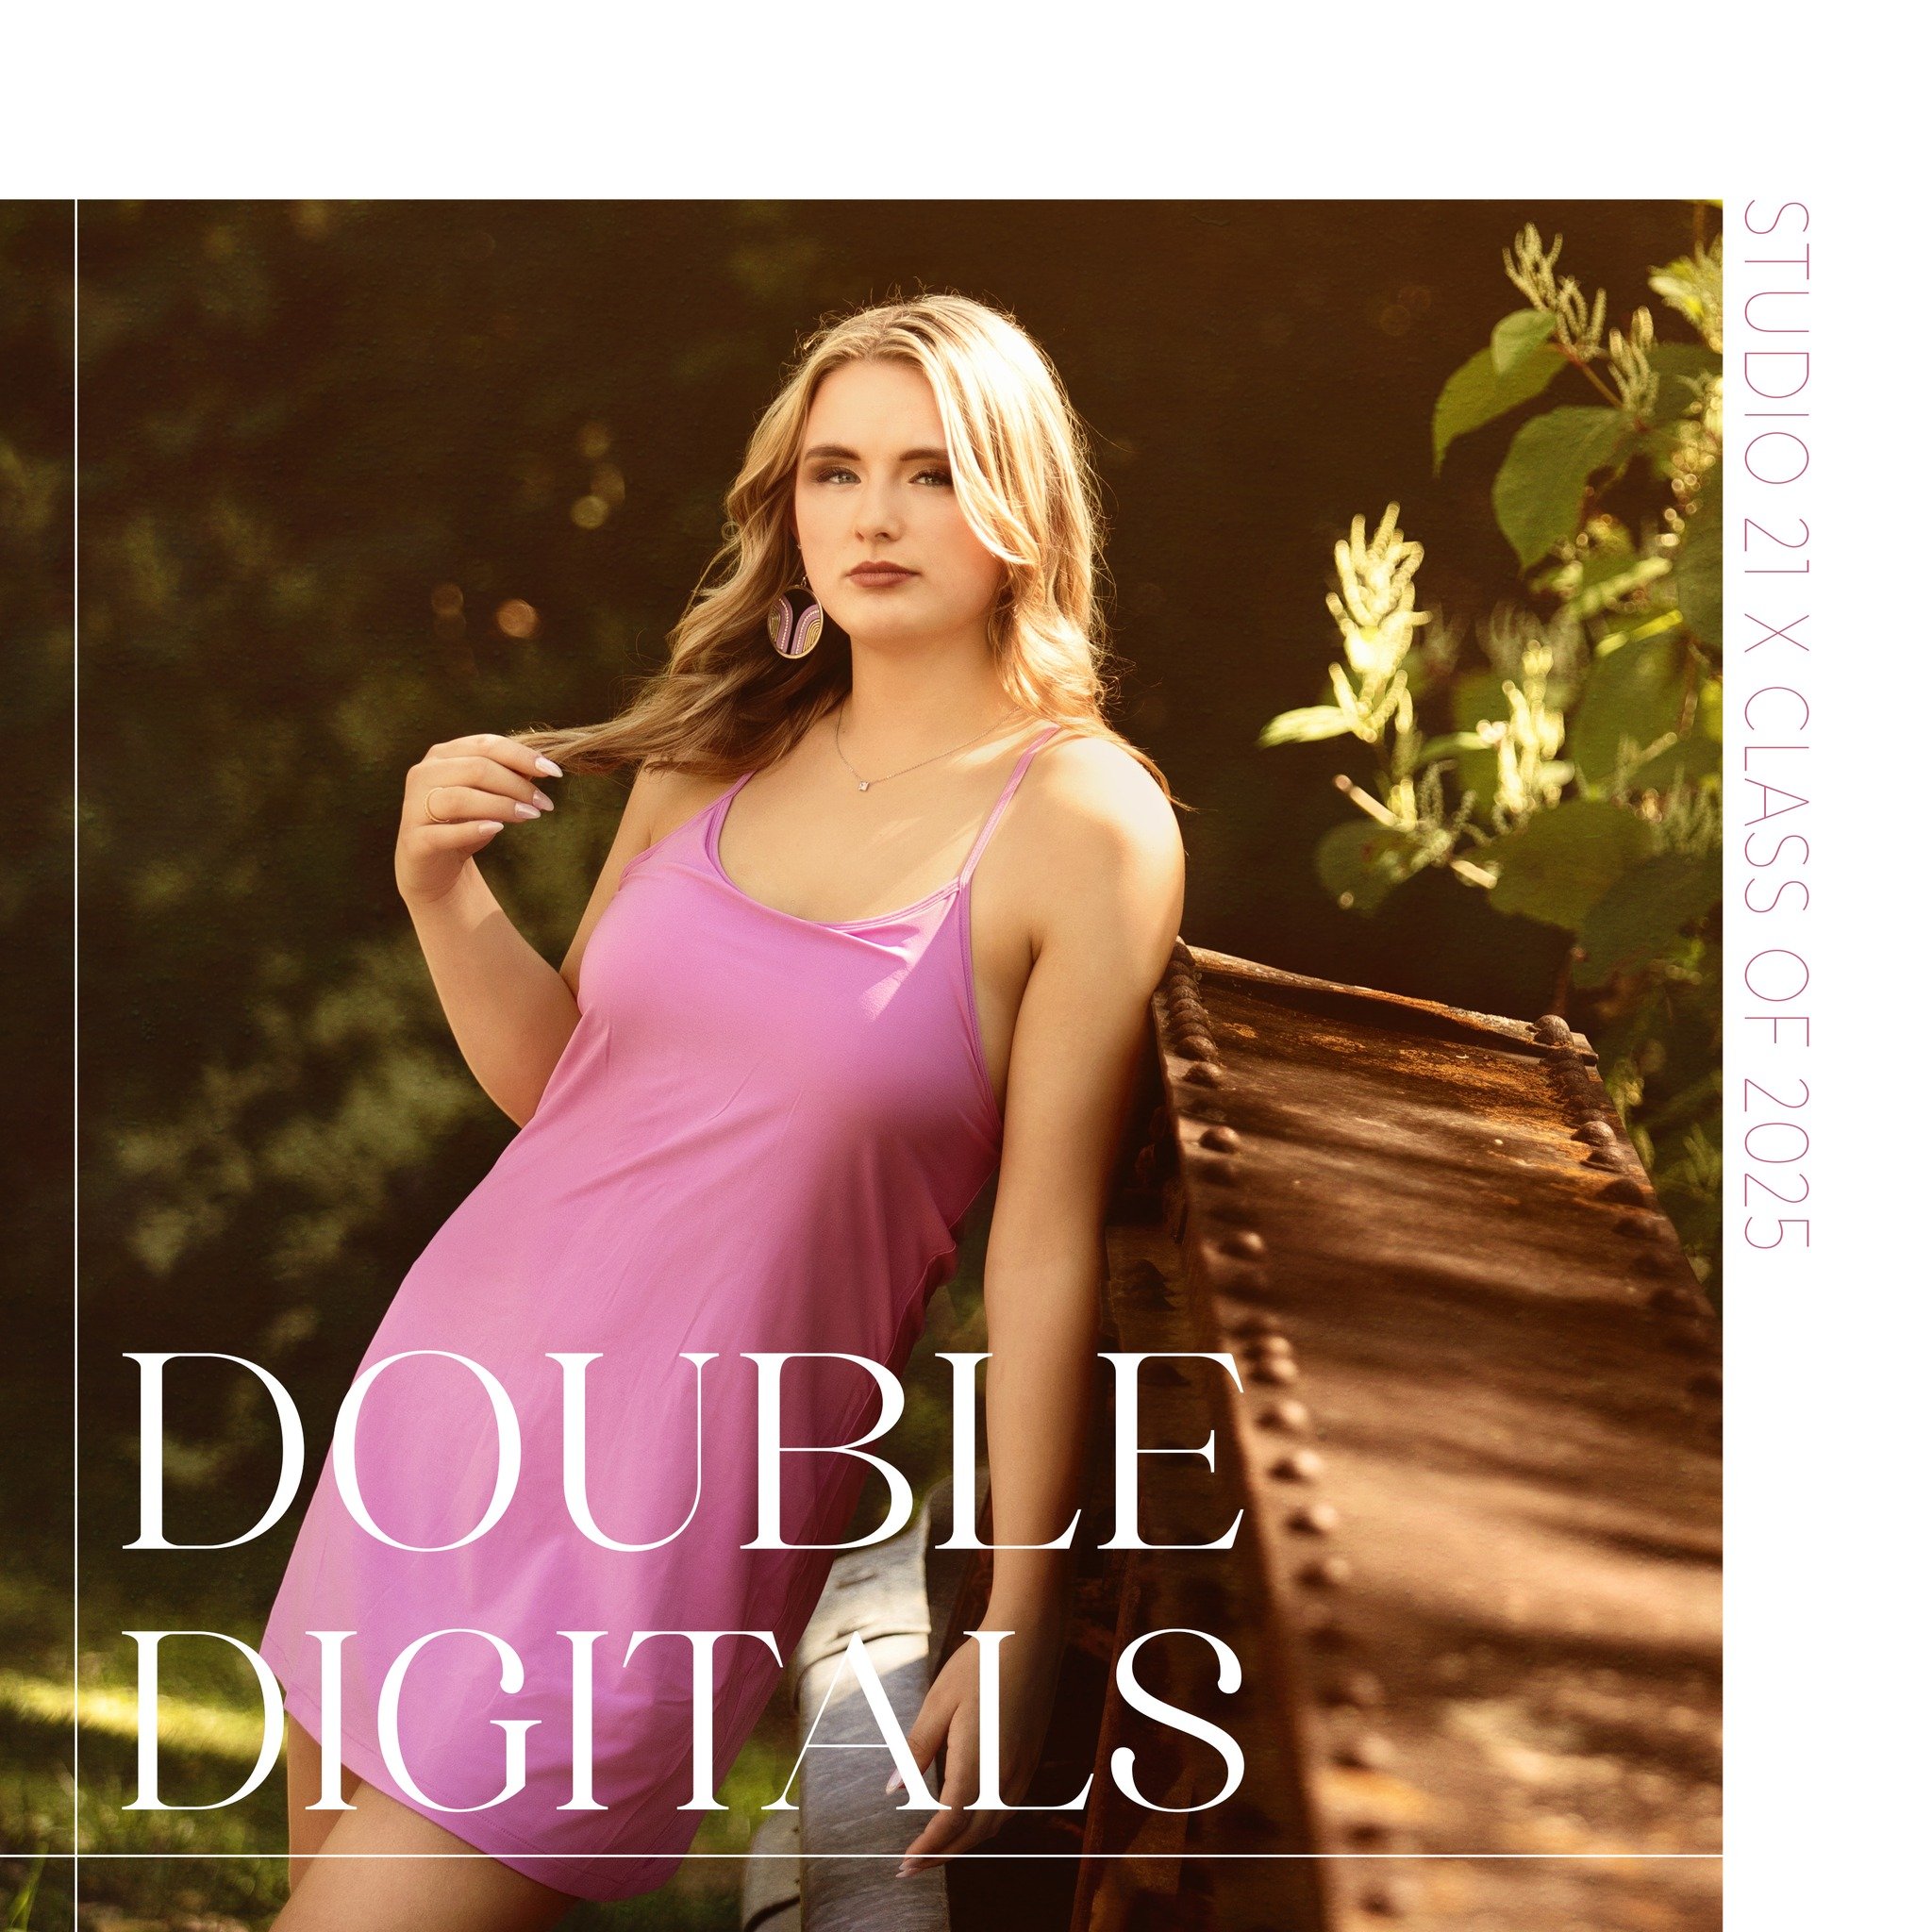 CLASS of 2025. IT. IS. TIME. ⏰

Make your senior year unforgettable with our Double the Digitals exclusive offer. For a limited time, when you book any of our Senior Collections, you'll receive ⚡️DOUBLE⚡️ the digital images!

💥 The Essentials: 20 Di